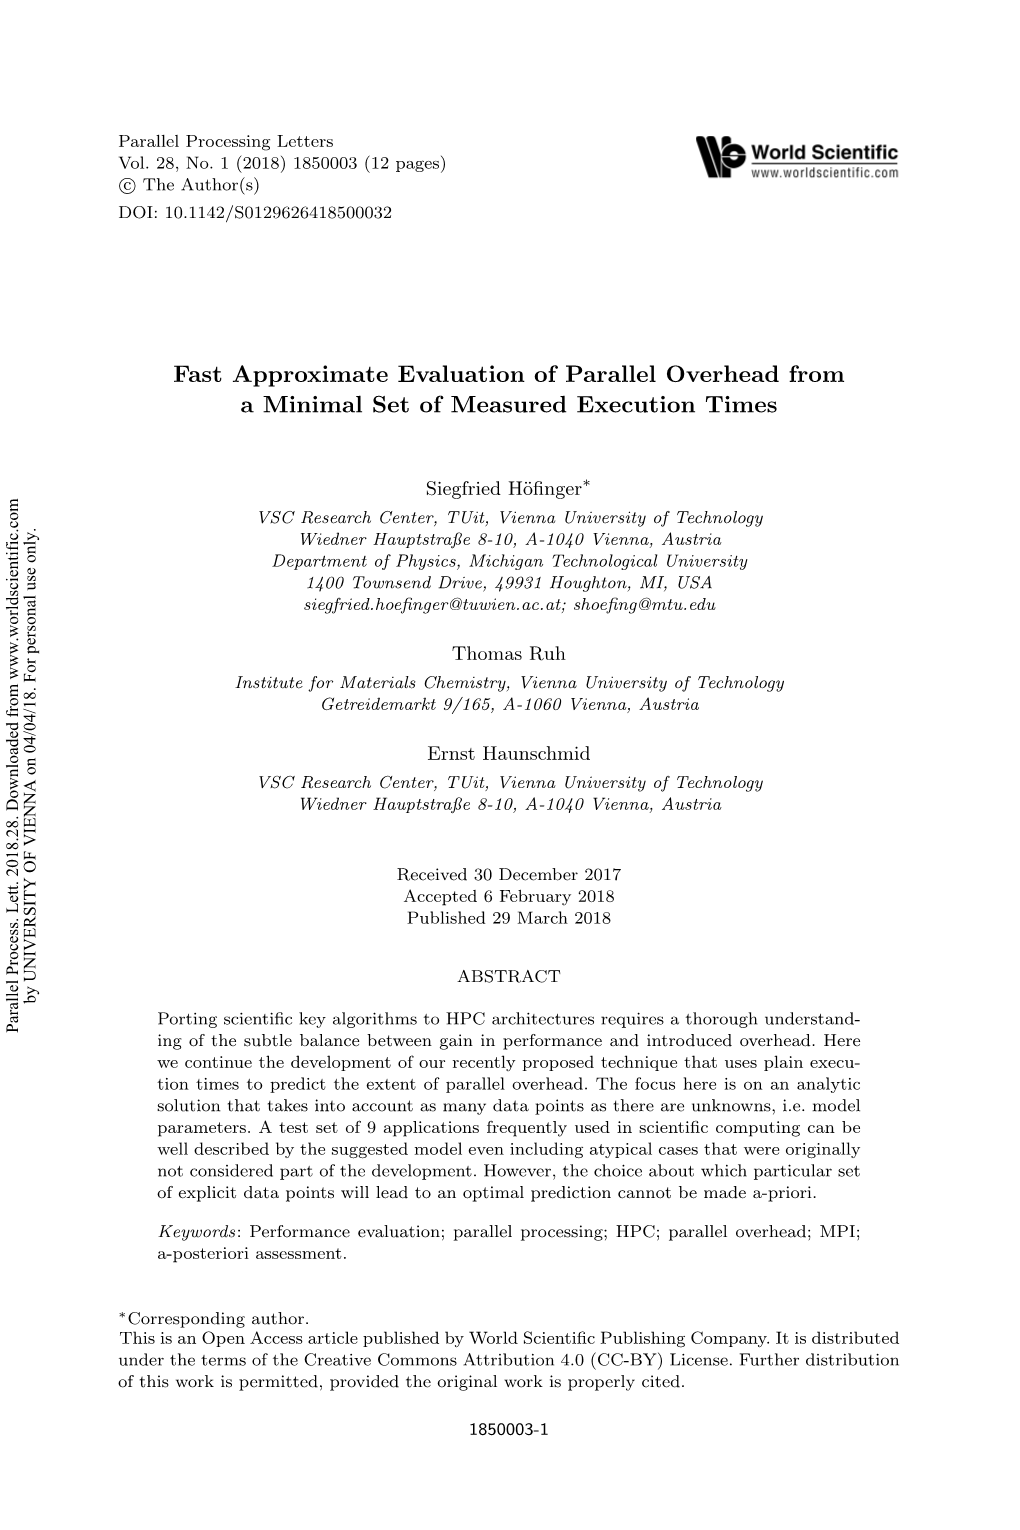 Fast Approximate Evaluation of Parallel Overhead from a Minimal Set of Measured Execution Times